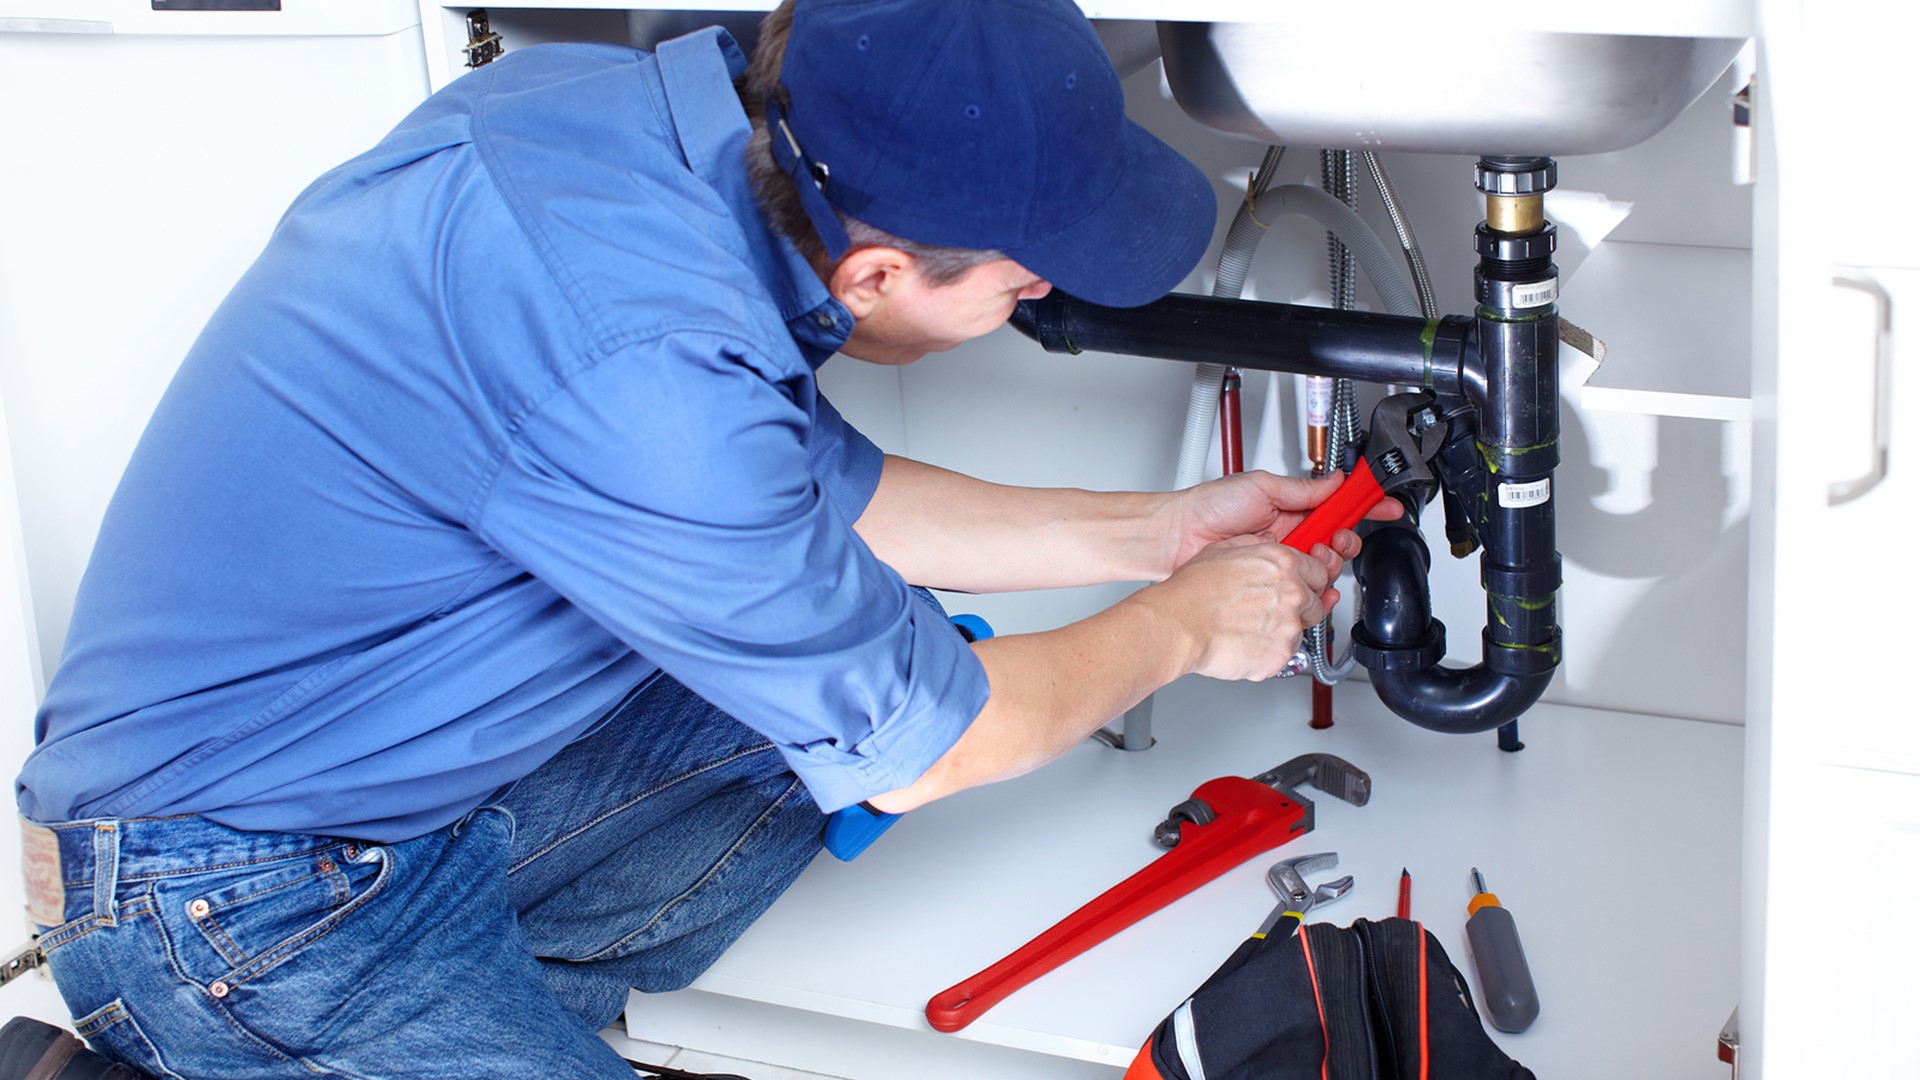 What is residential plumbing?